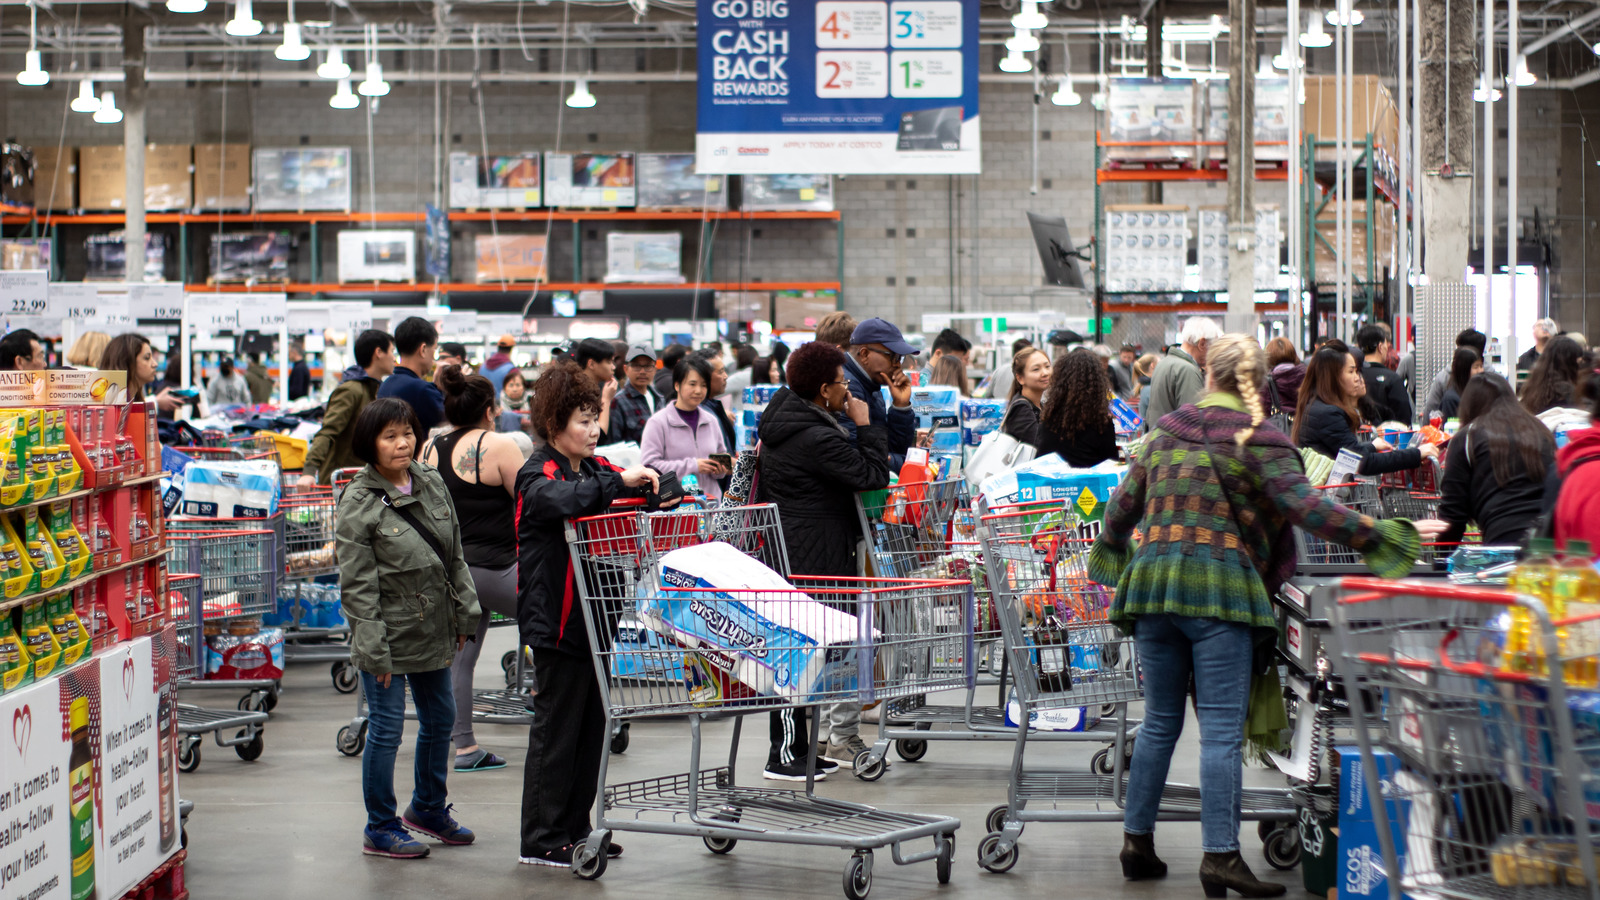 The Returning Costco Treats That Have Shoppers Thrilled